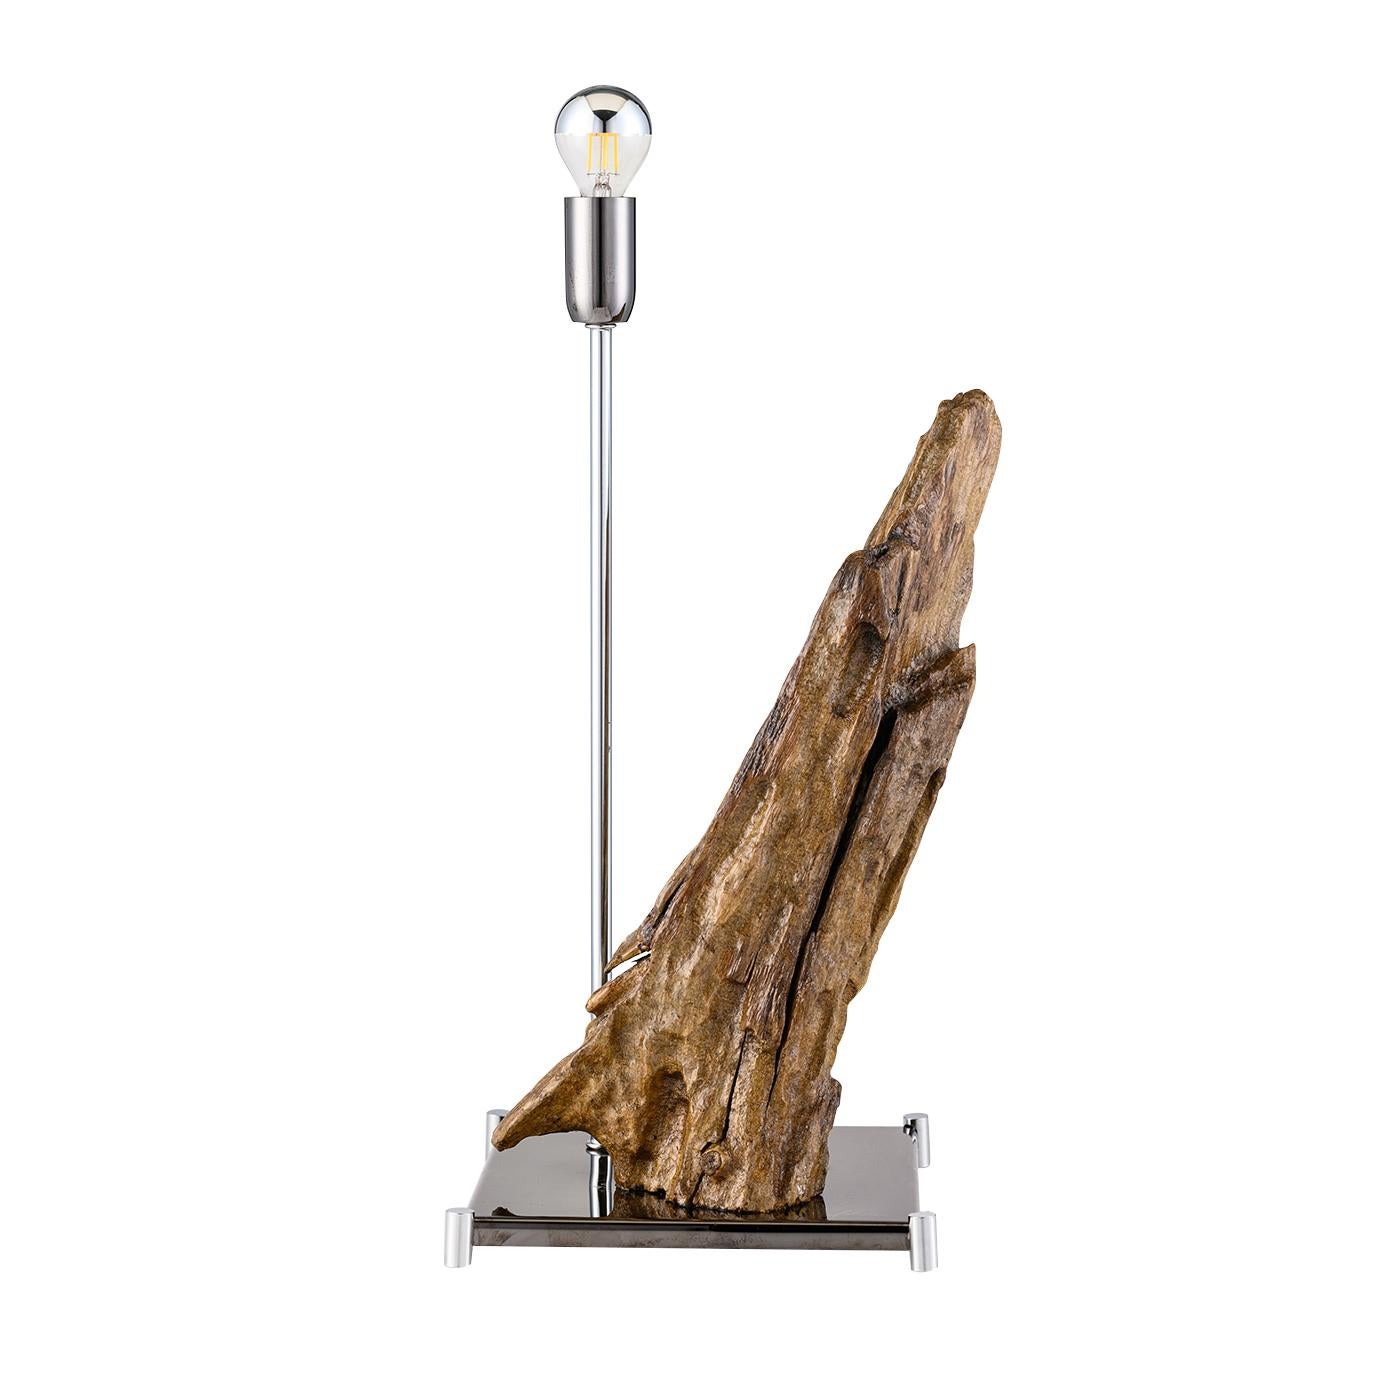 The stunning Everest lighting sculpture, featuring sea wood from the Amalfi Coast, is both sophisticated and unique in design. Sitting atop a reflective black stainless steel base with gold brass feet, the unique wood sculpture provides an